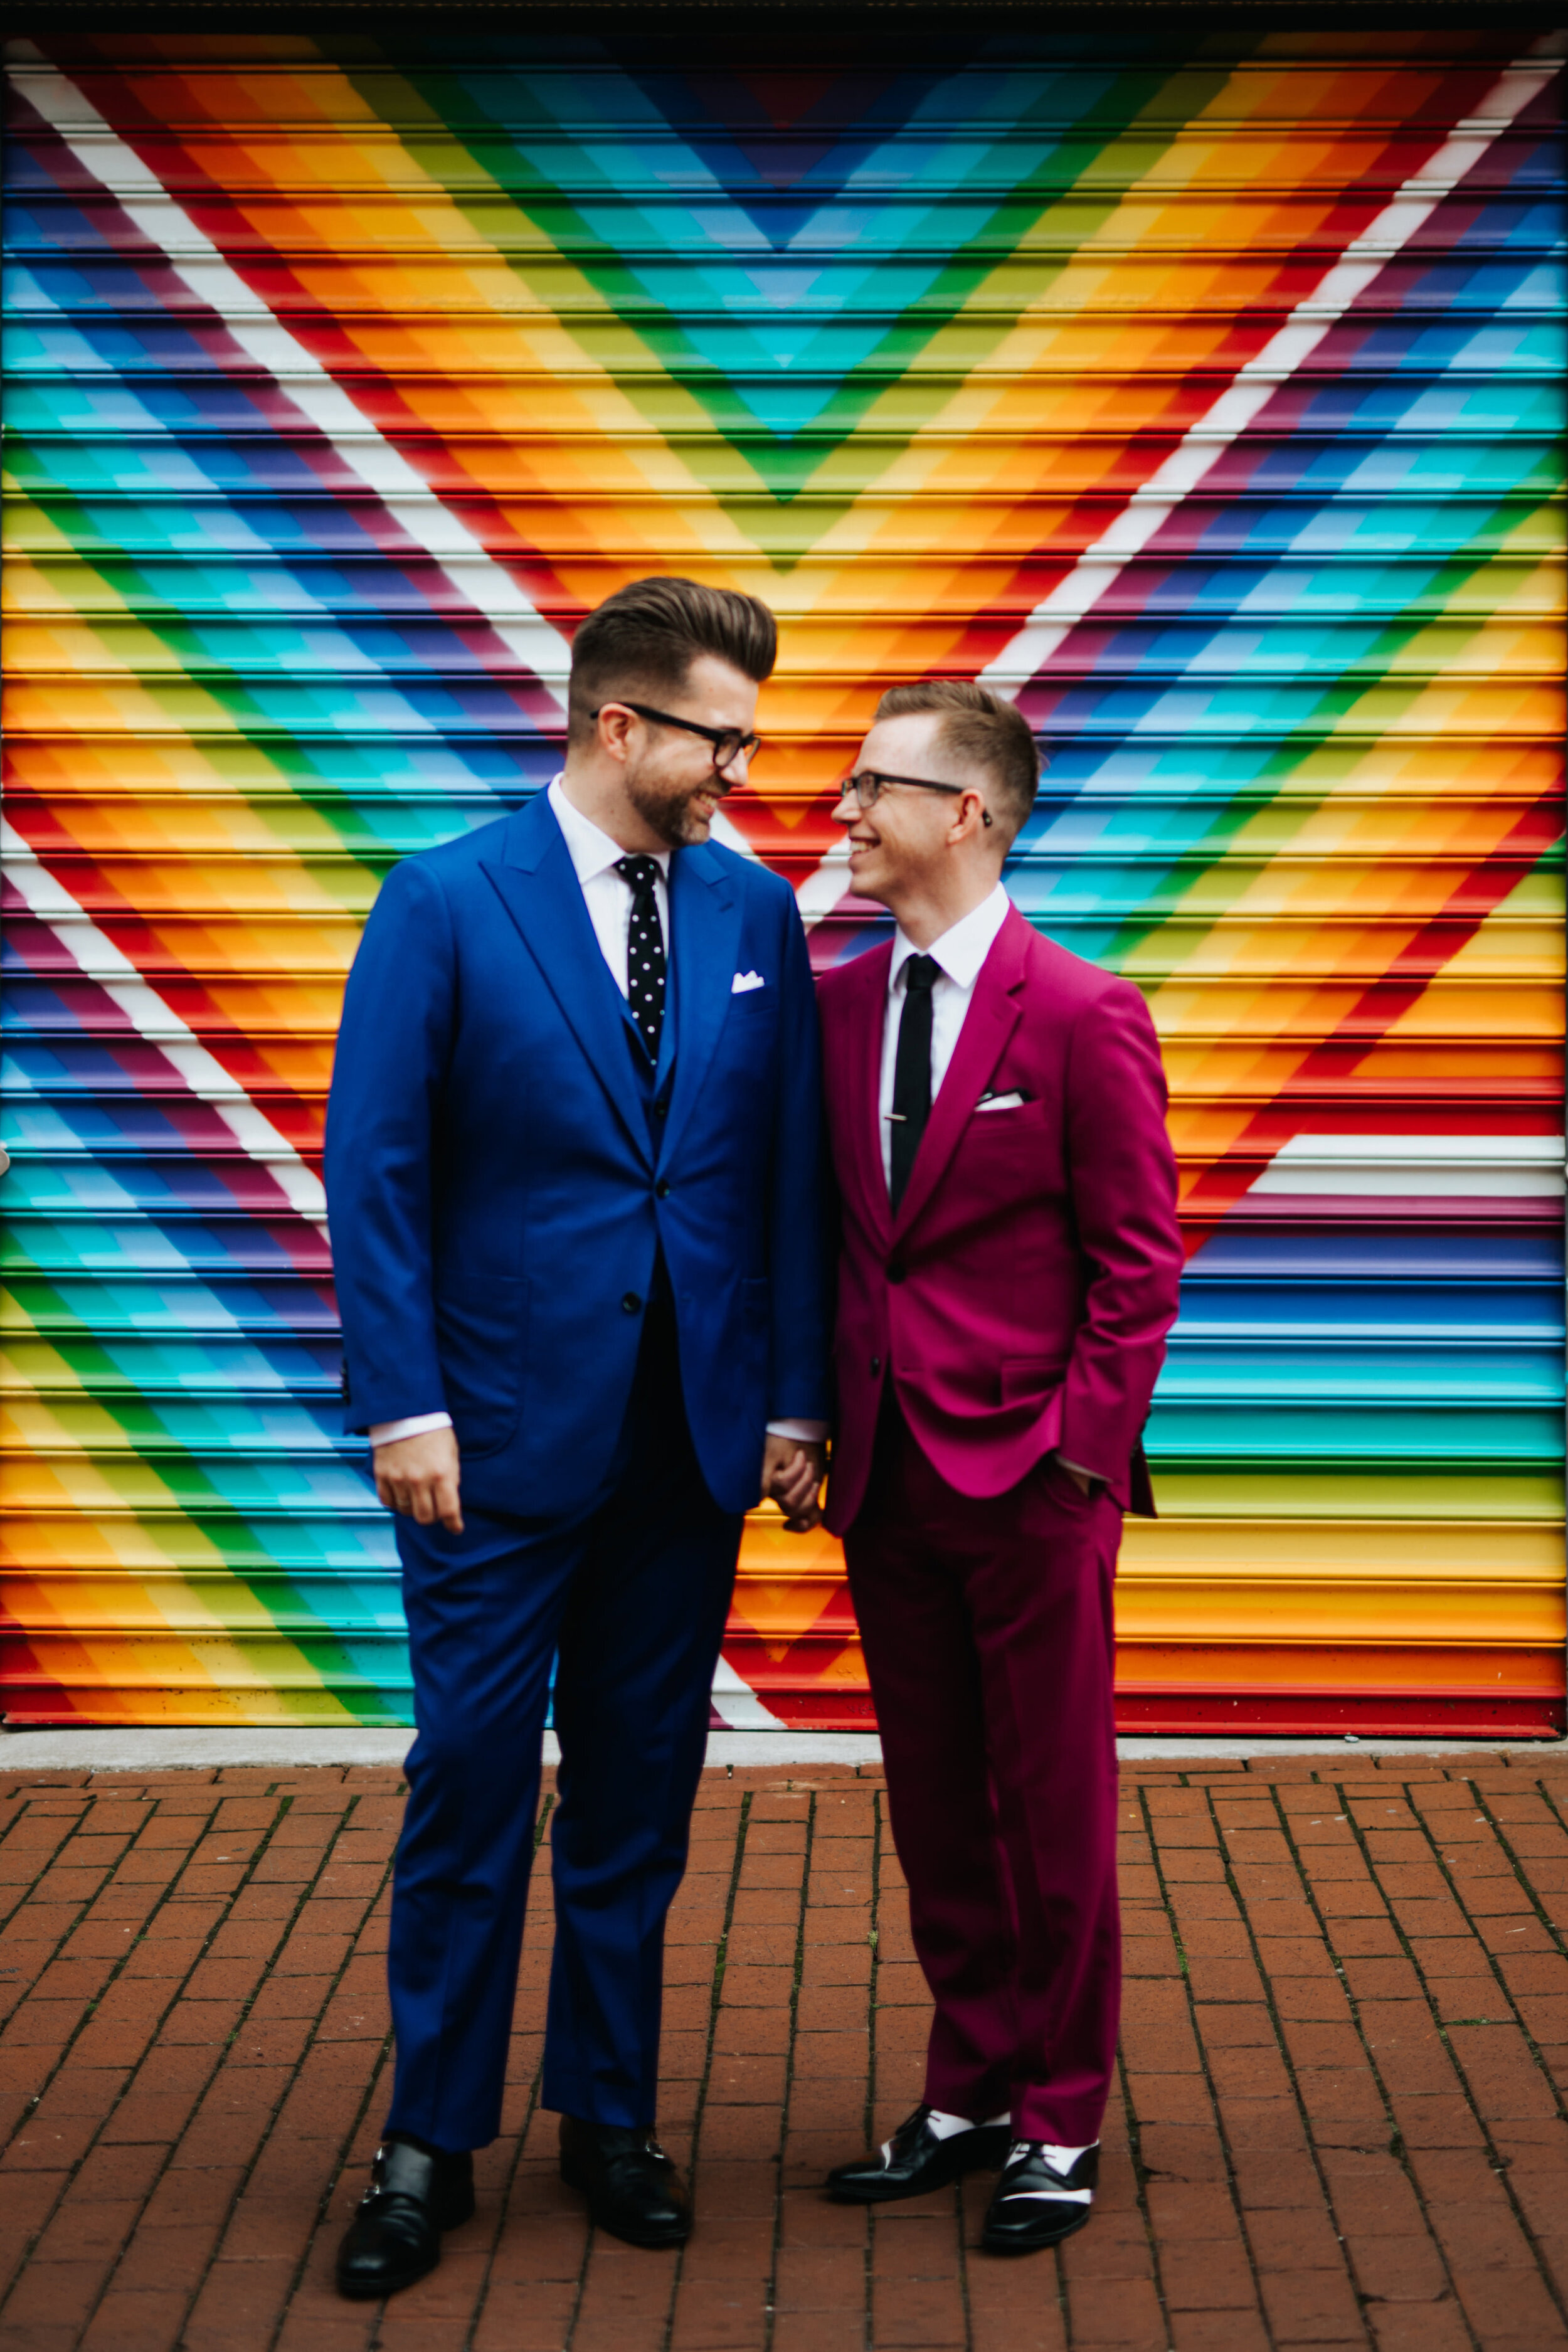 LGBTQ couple in blue and maroon suits posing by a rainbow mural in NYC Shawnee Custalow Queer Wedding Photographer